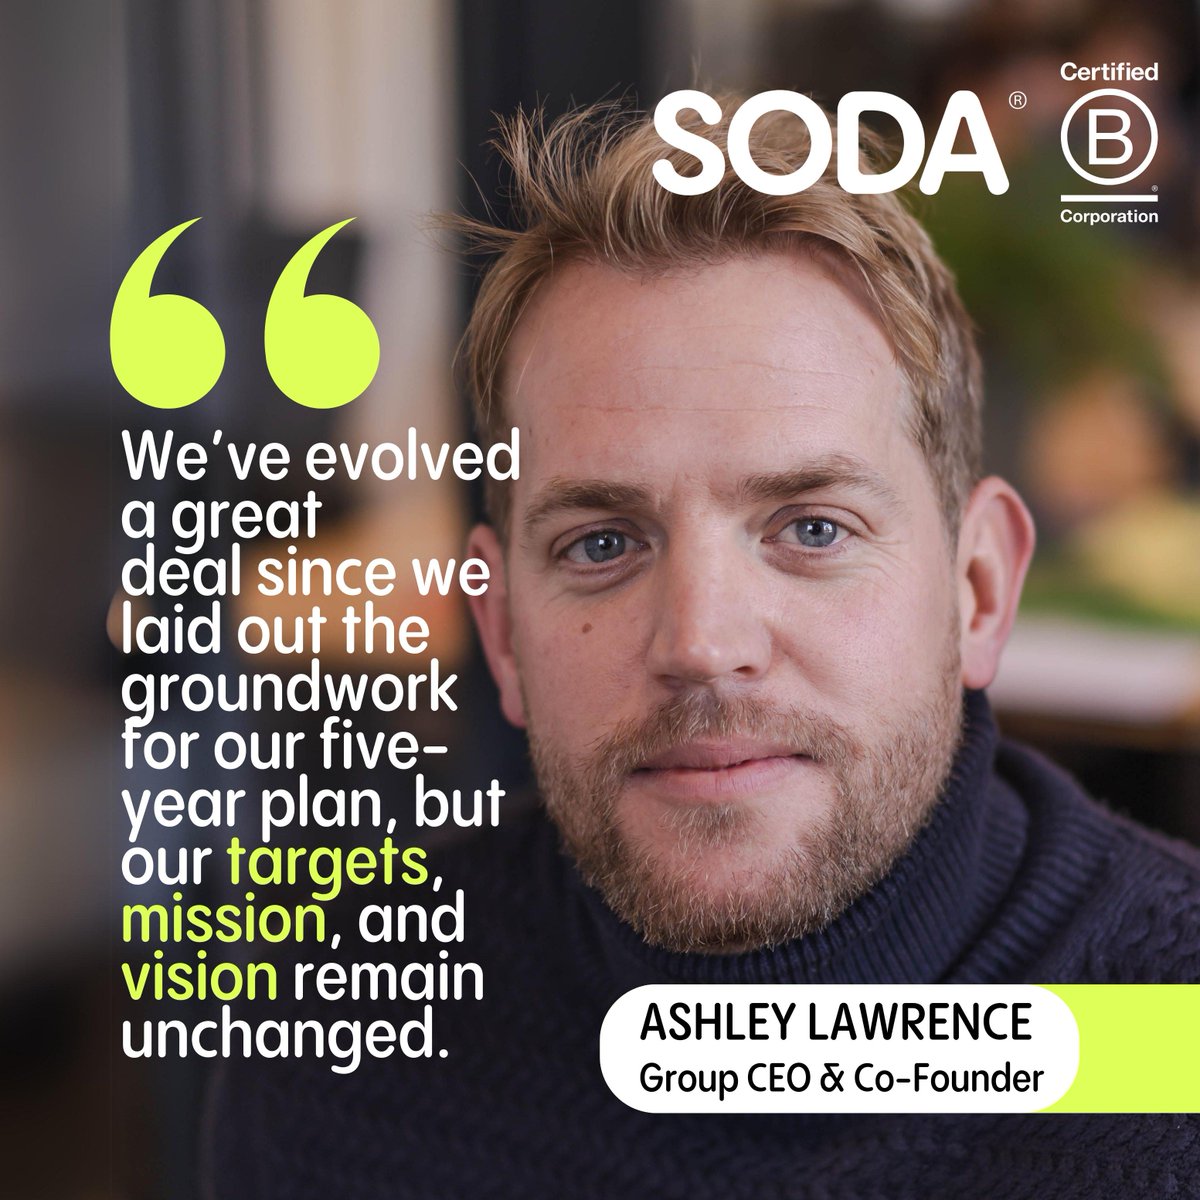 In our annual impact report, we shine a spotlight on our key achievements, the challenges we've faced along the way, and the promising future ahead. 

Download the full report now: buff.ly/49Vas2Y

#TrustinSODA #ImpactReport